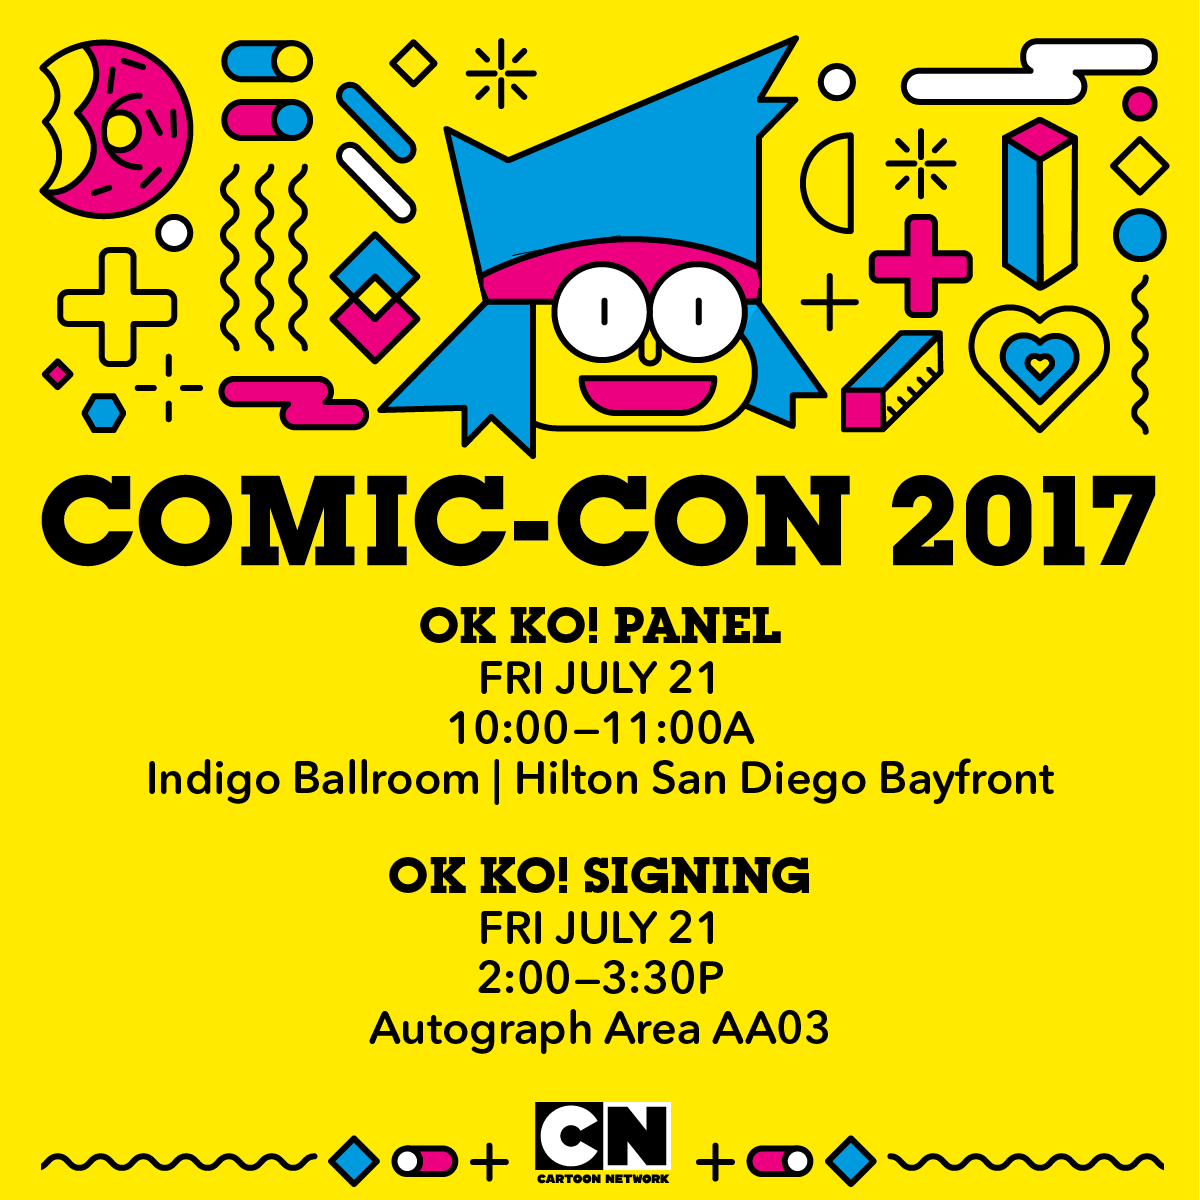 Check out our newest hero TODAY at Comic Con for an @ok-ko panel and signing with